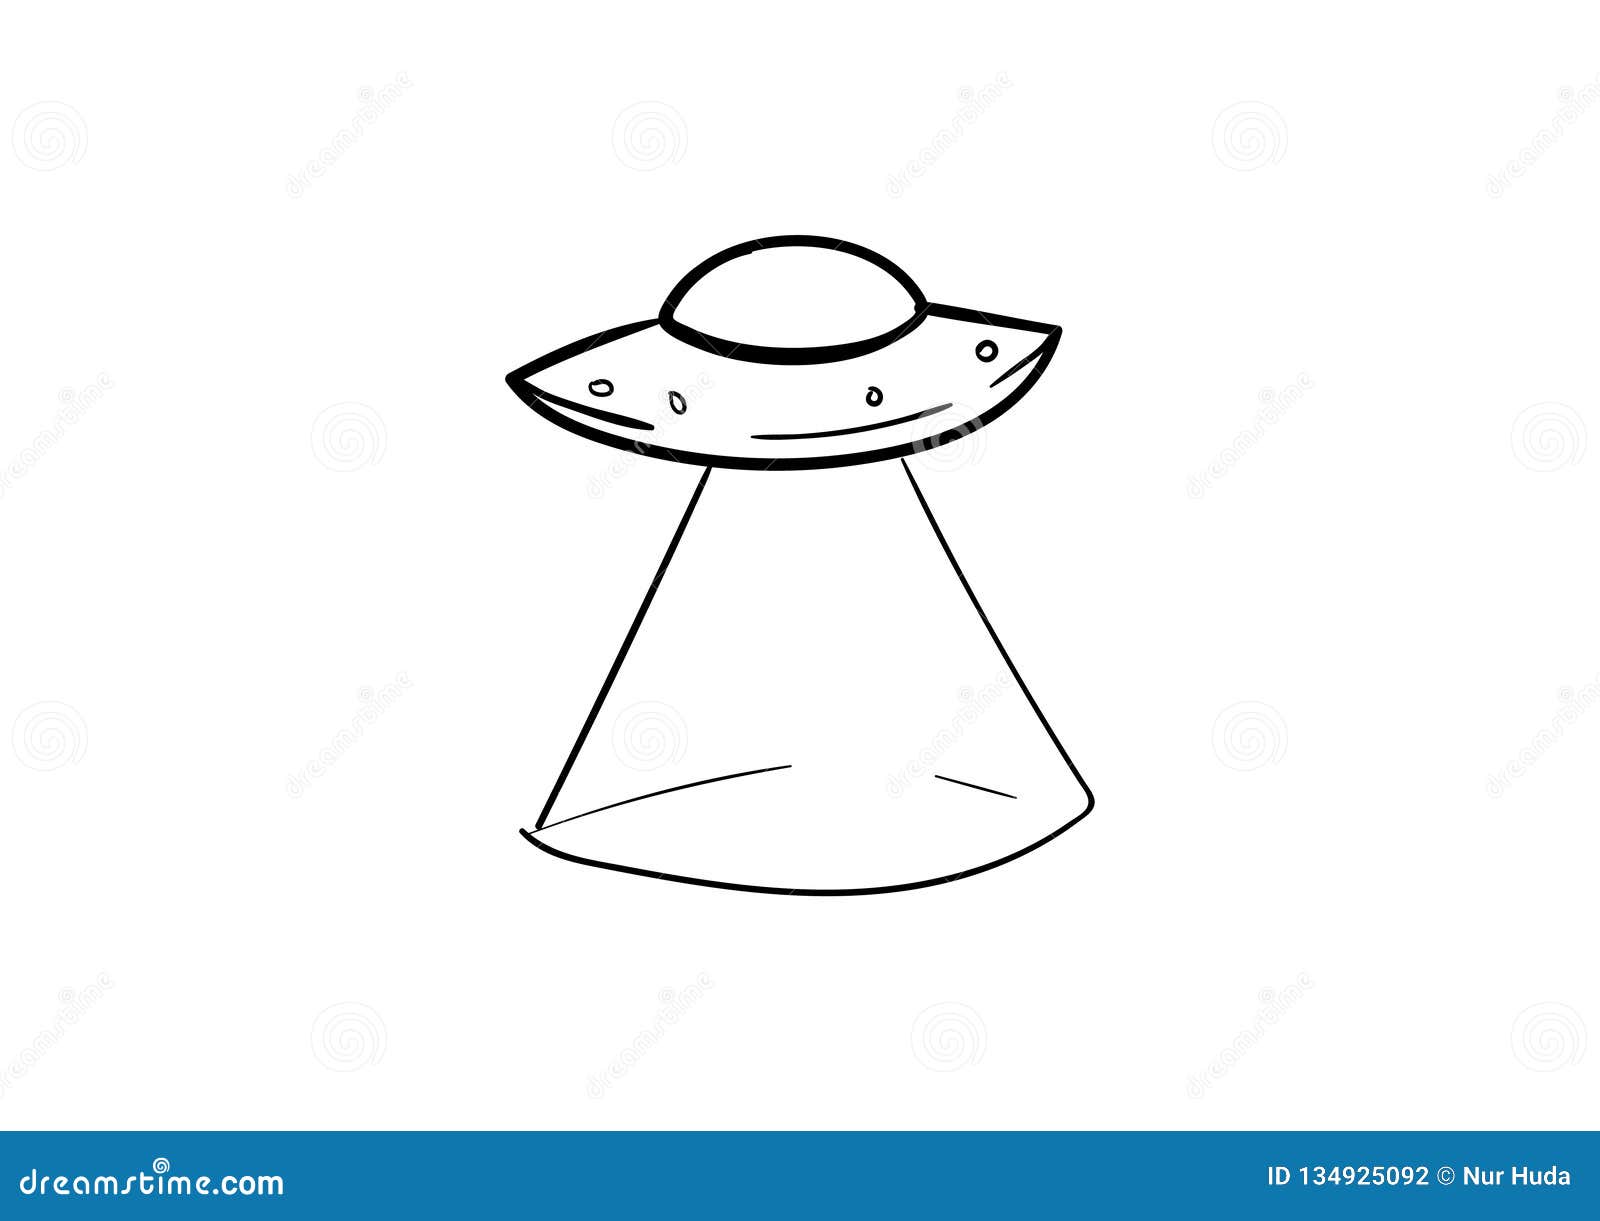 Ufo Drawing Stock Illustrations 7 790 Ufo Drawing Stock Illustrations Vectors Clipart Dreamstime